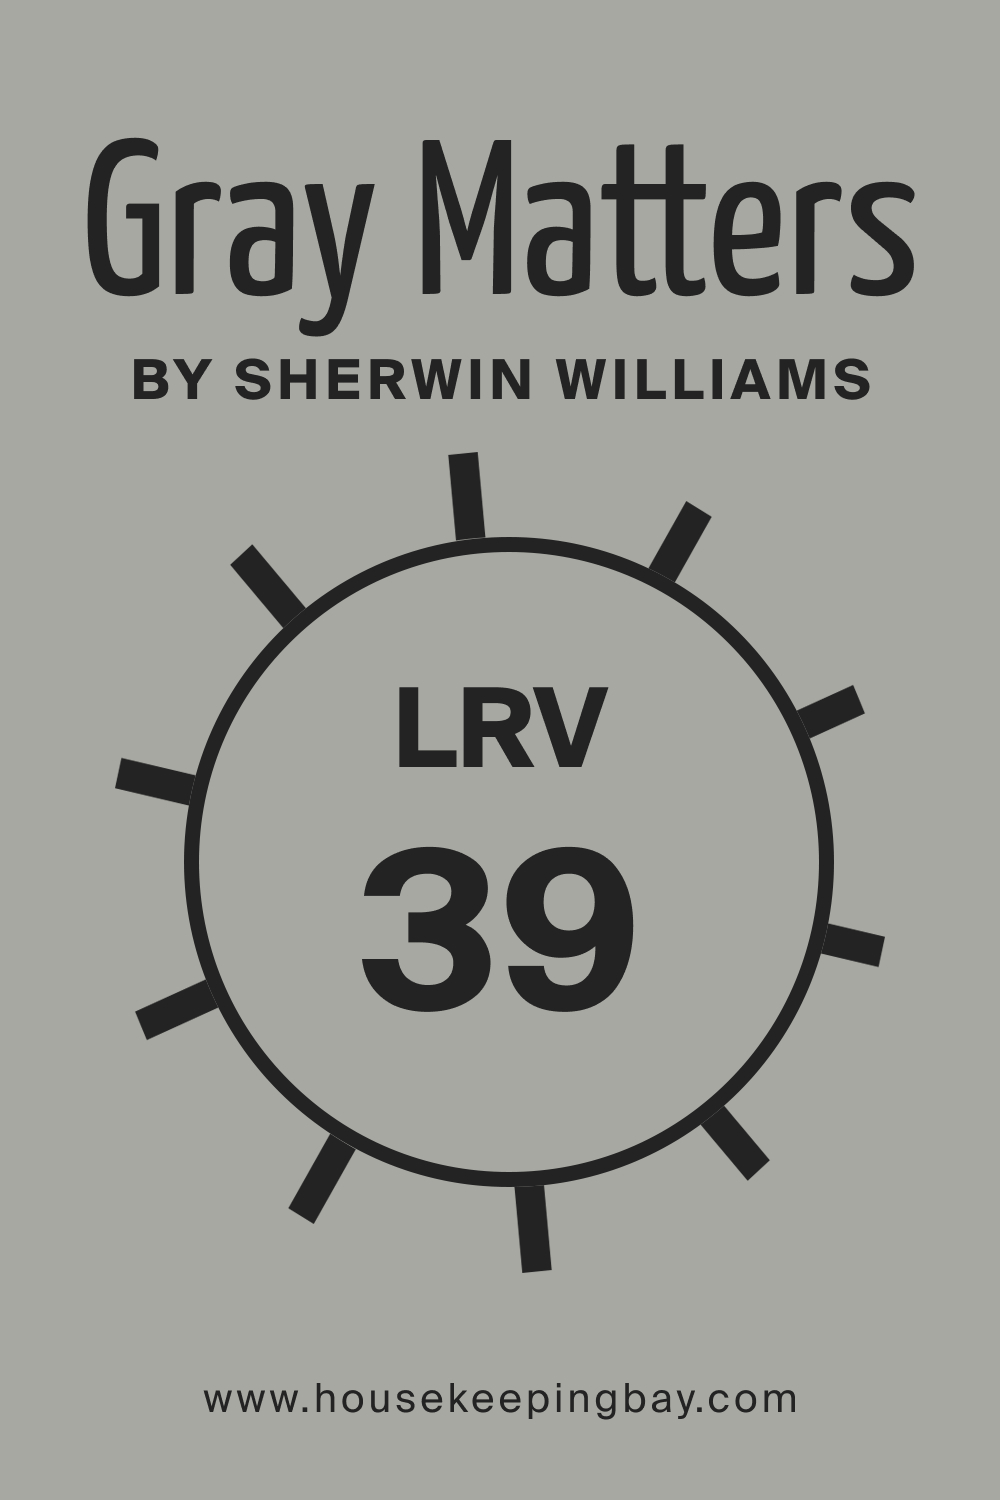 Gray Matters SW 7066 by Sherwin Williams. LRV – 39